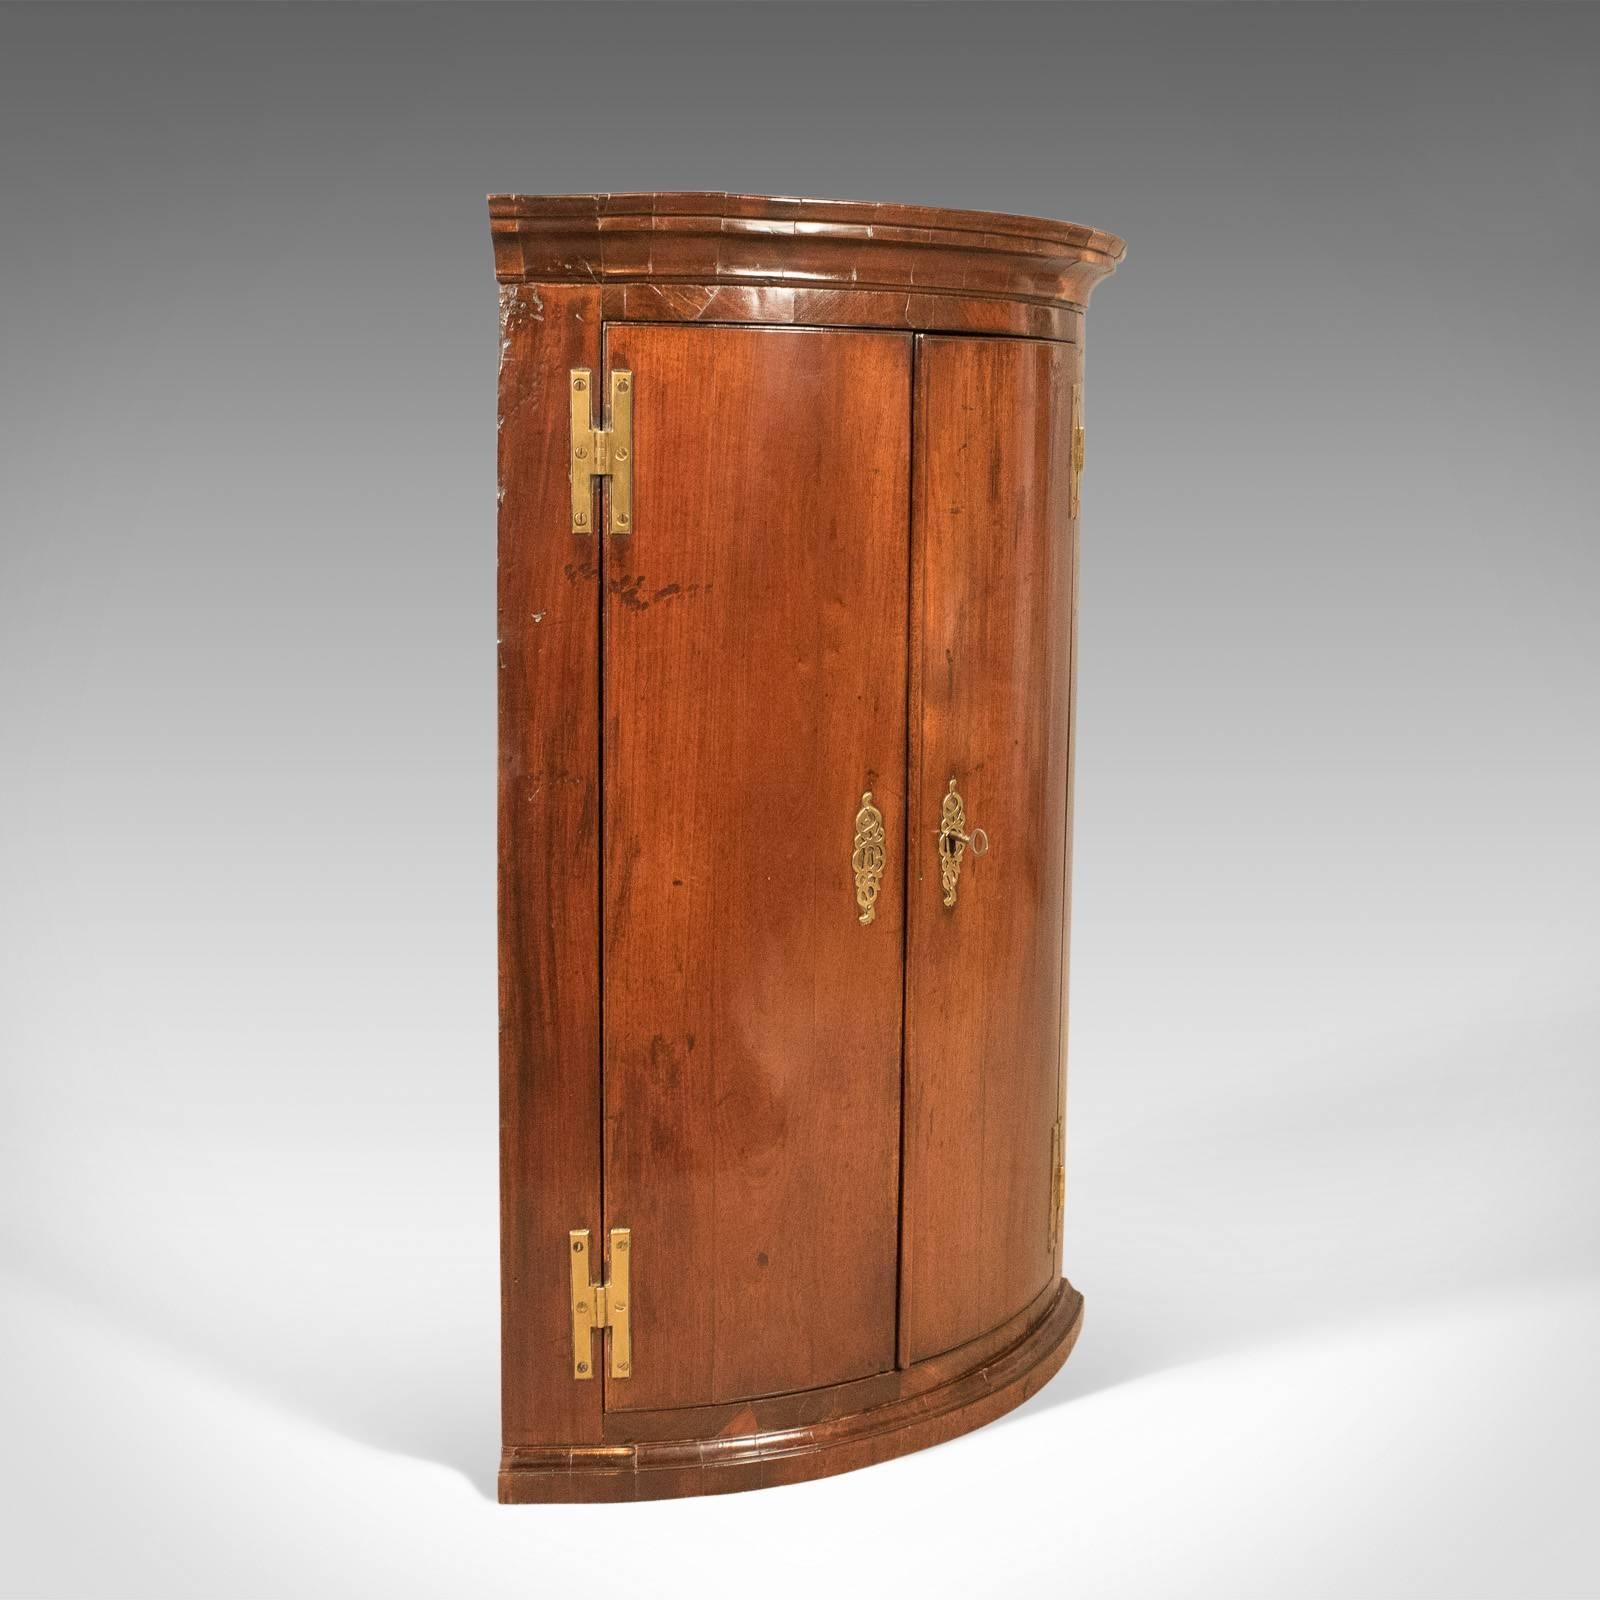 This is a fine example of a bow fronted antique corner cabinet, Georgian, circa 1725.

Superior example of an early Georgian corner cabinet
Mahogany front displaying good colour, grain interest and patina
Historic professionally re-carcassed in